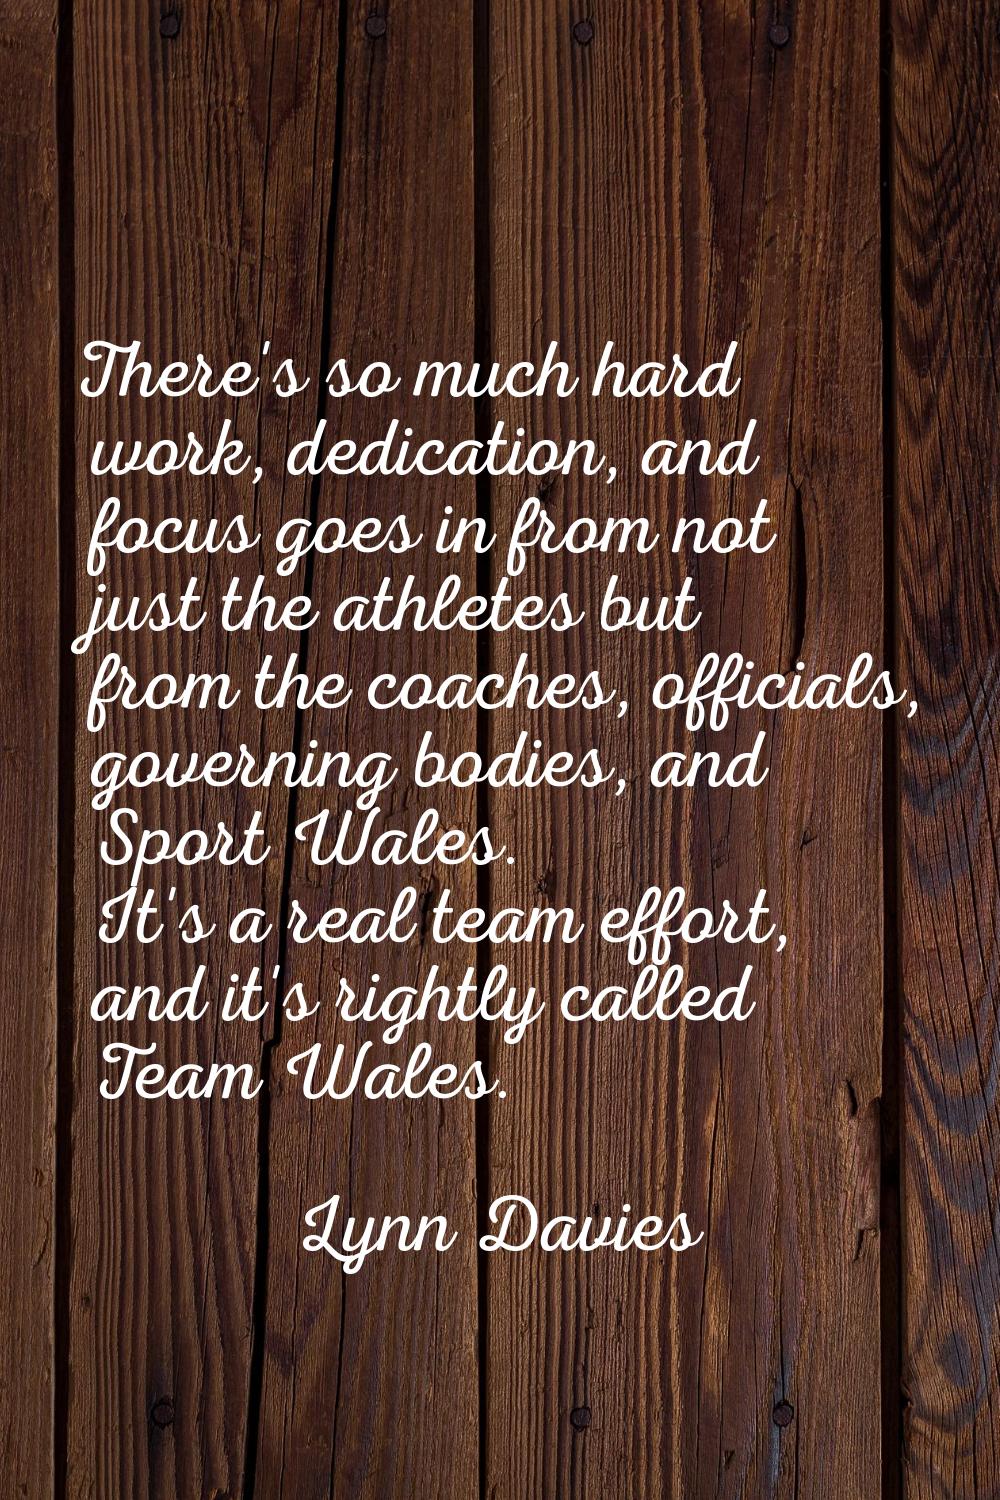 There's so much hard work, dedication, and focus goes in from not just the athletes but from the co